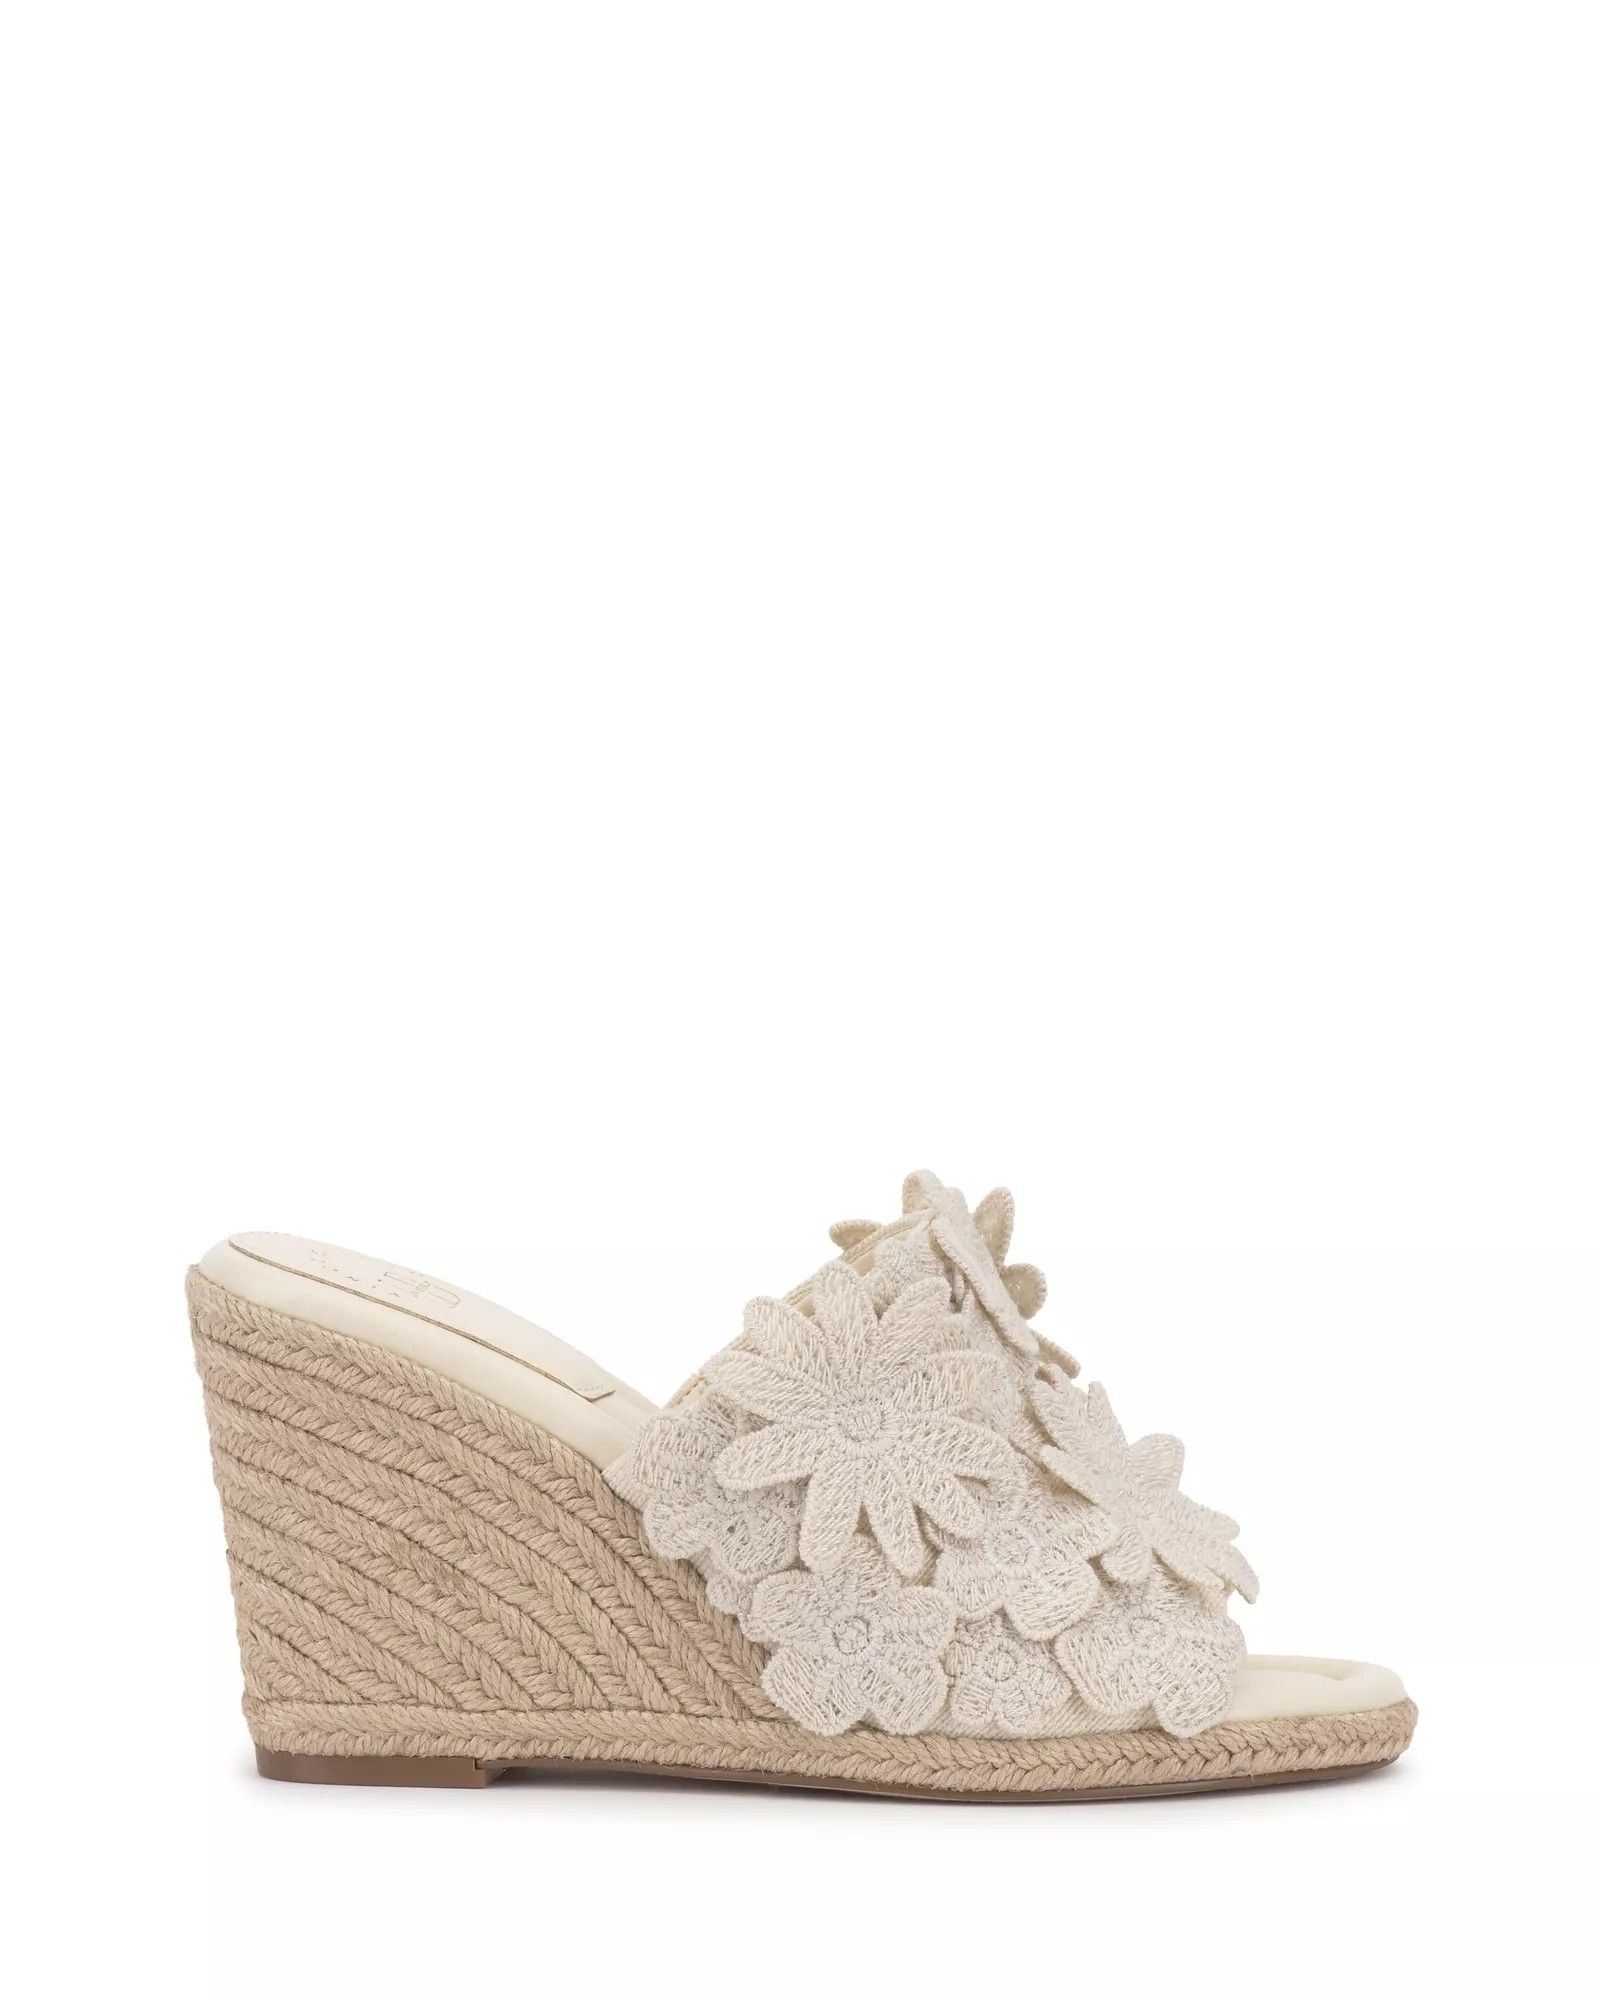 Vince Camuto VC x Laura Beverlin Daisy Wedge Mule | Vince Camuto